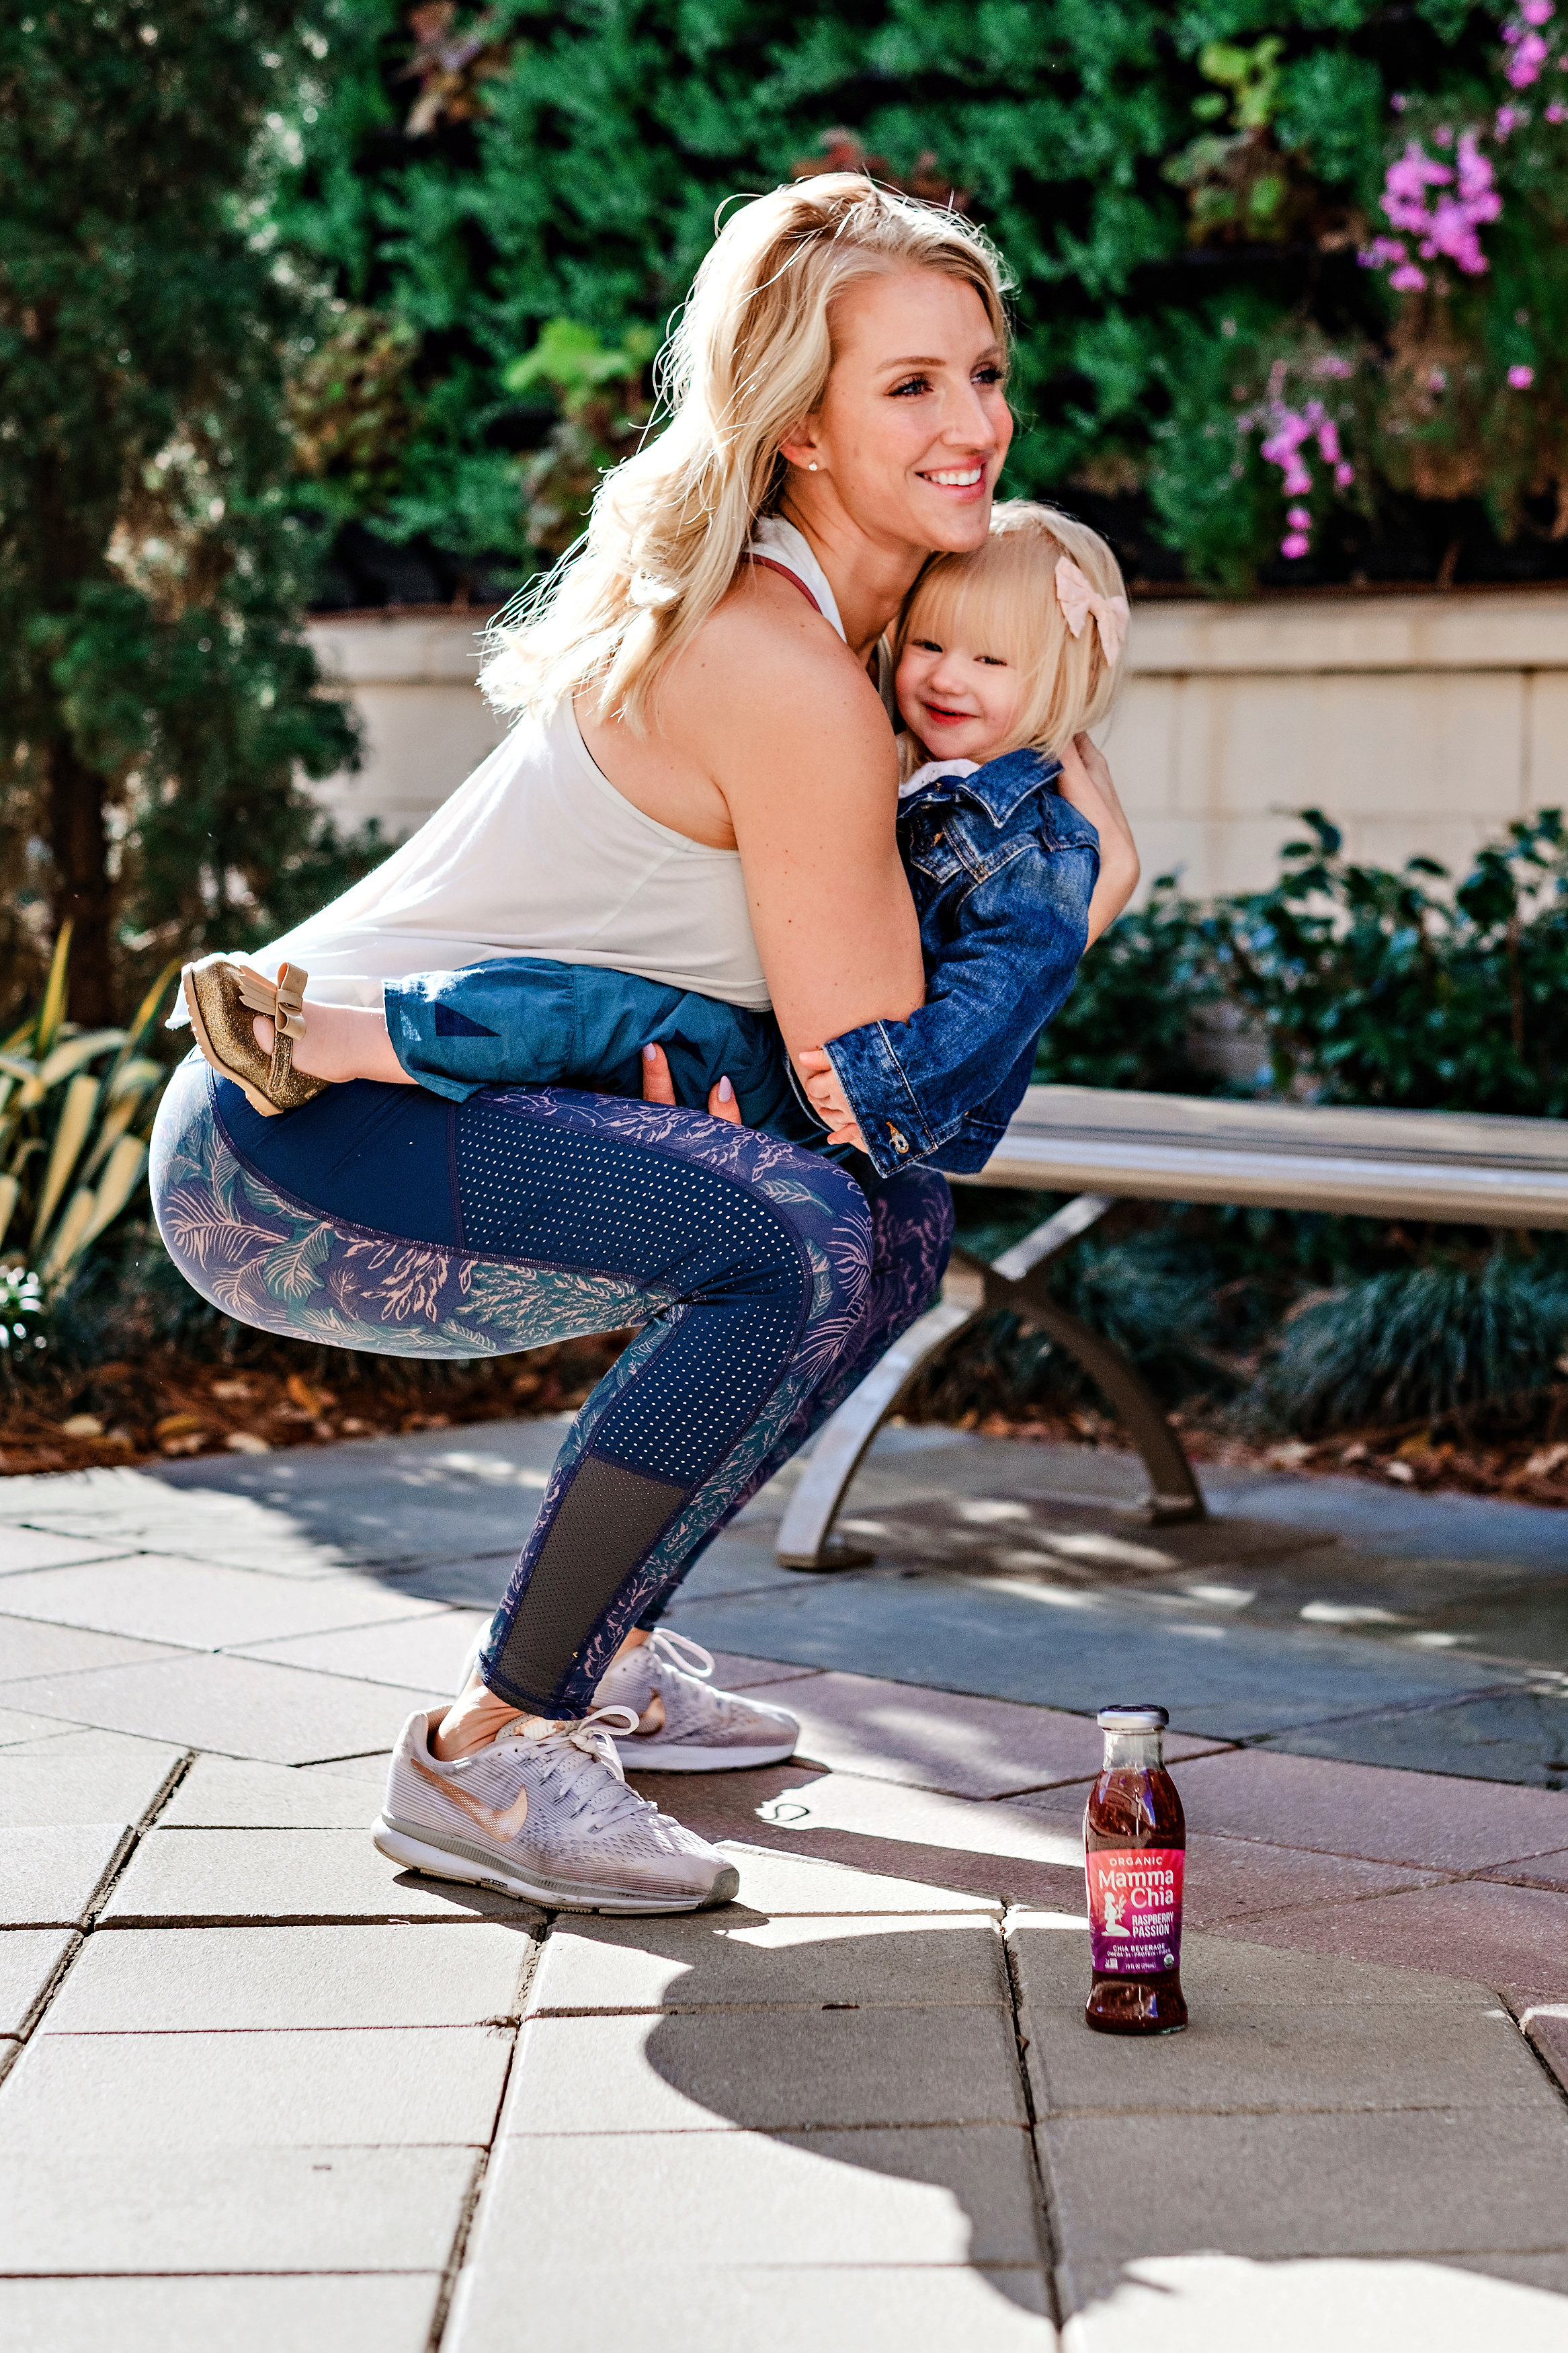 Why Chia Seeds are So Important for Health with Mamma Chia by popular Atlanta fitness blogger Happily Hughes